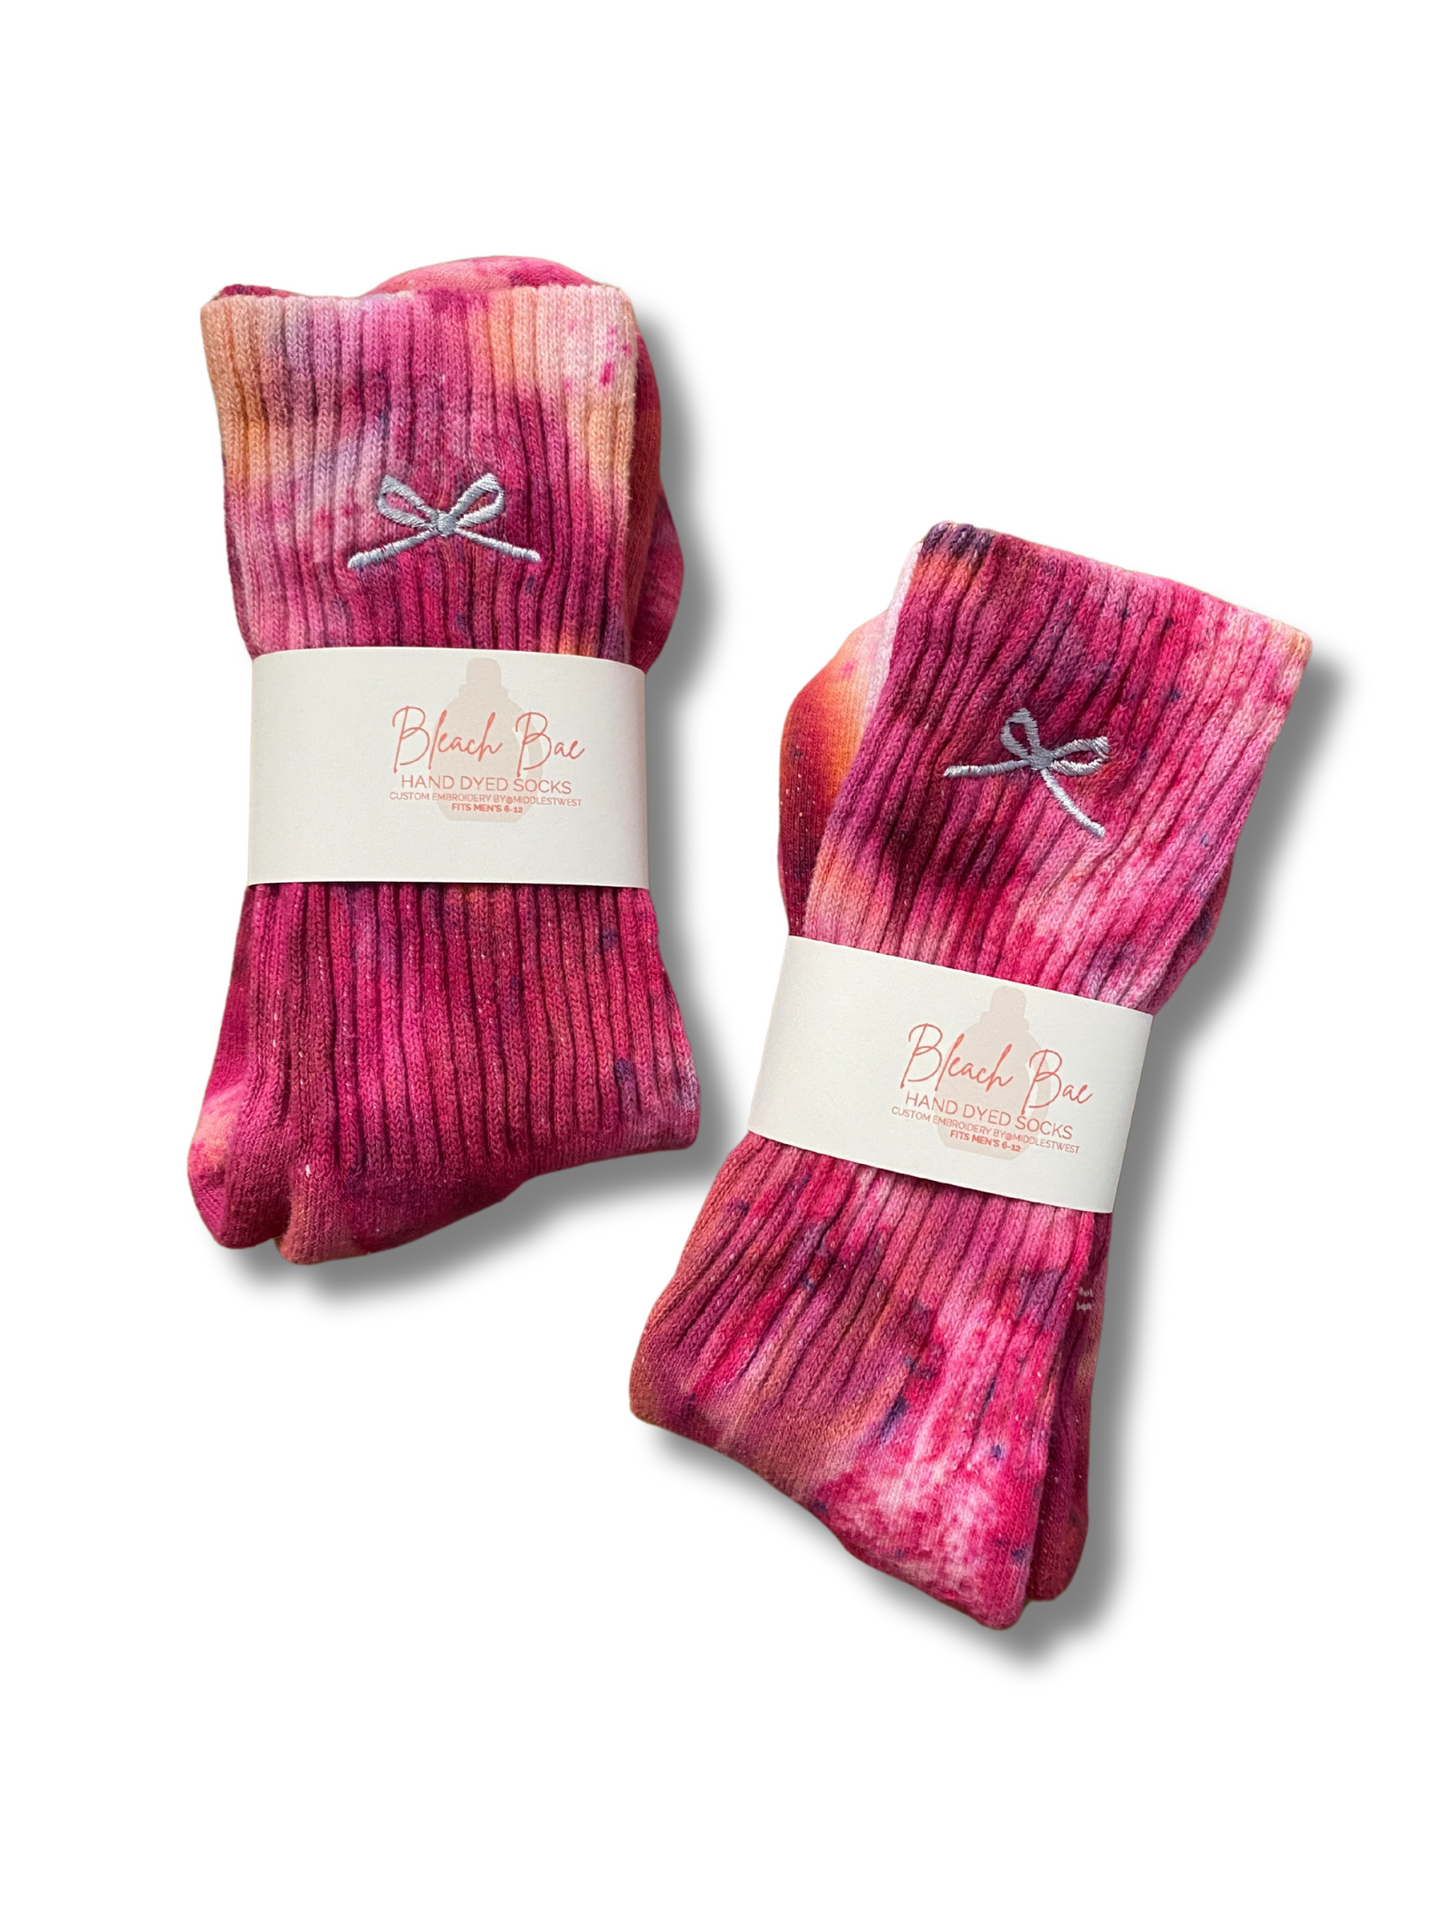 Valentine's Embroidered Socks Hand Dyed Socks- bows and hearts